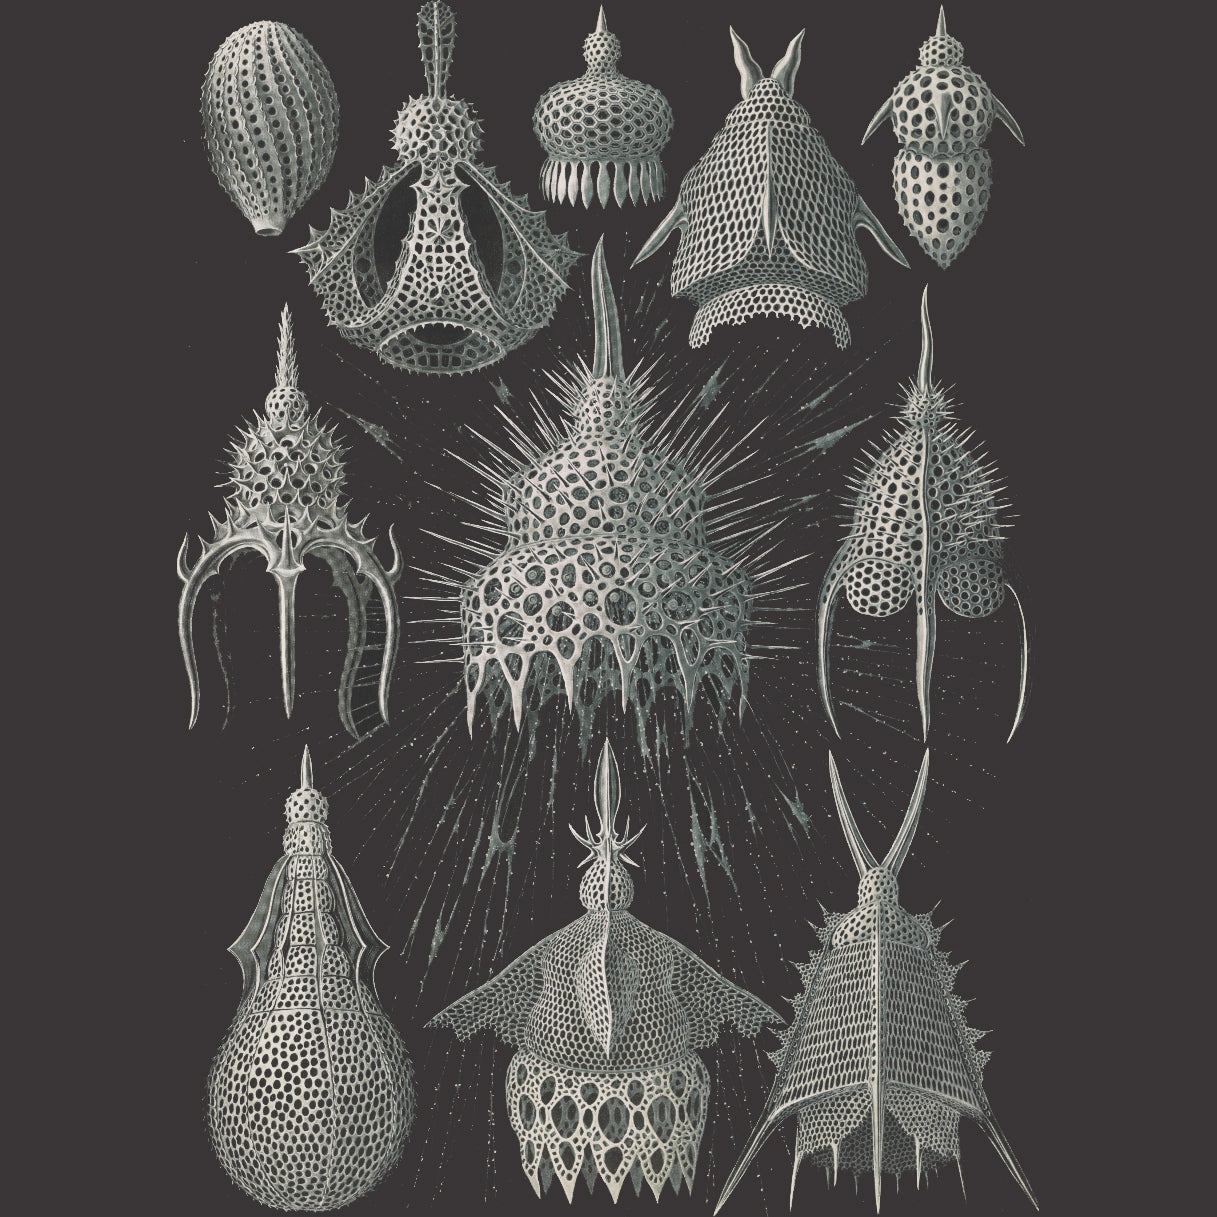 An introduction to Radiolaria - an organism over 500 million years old!